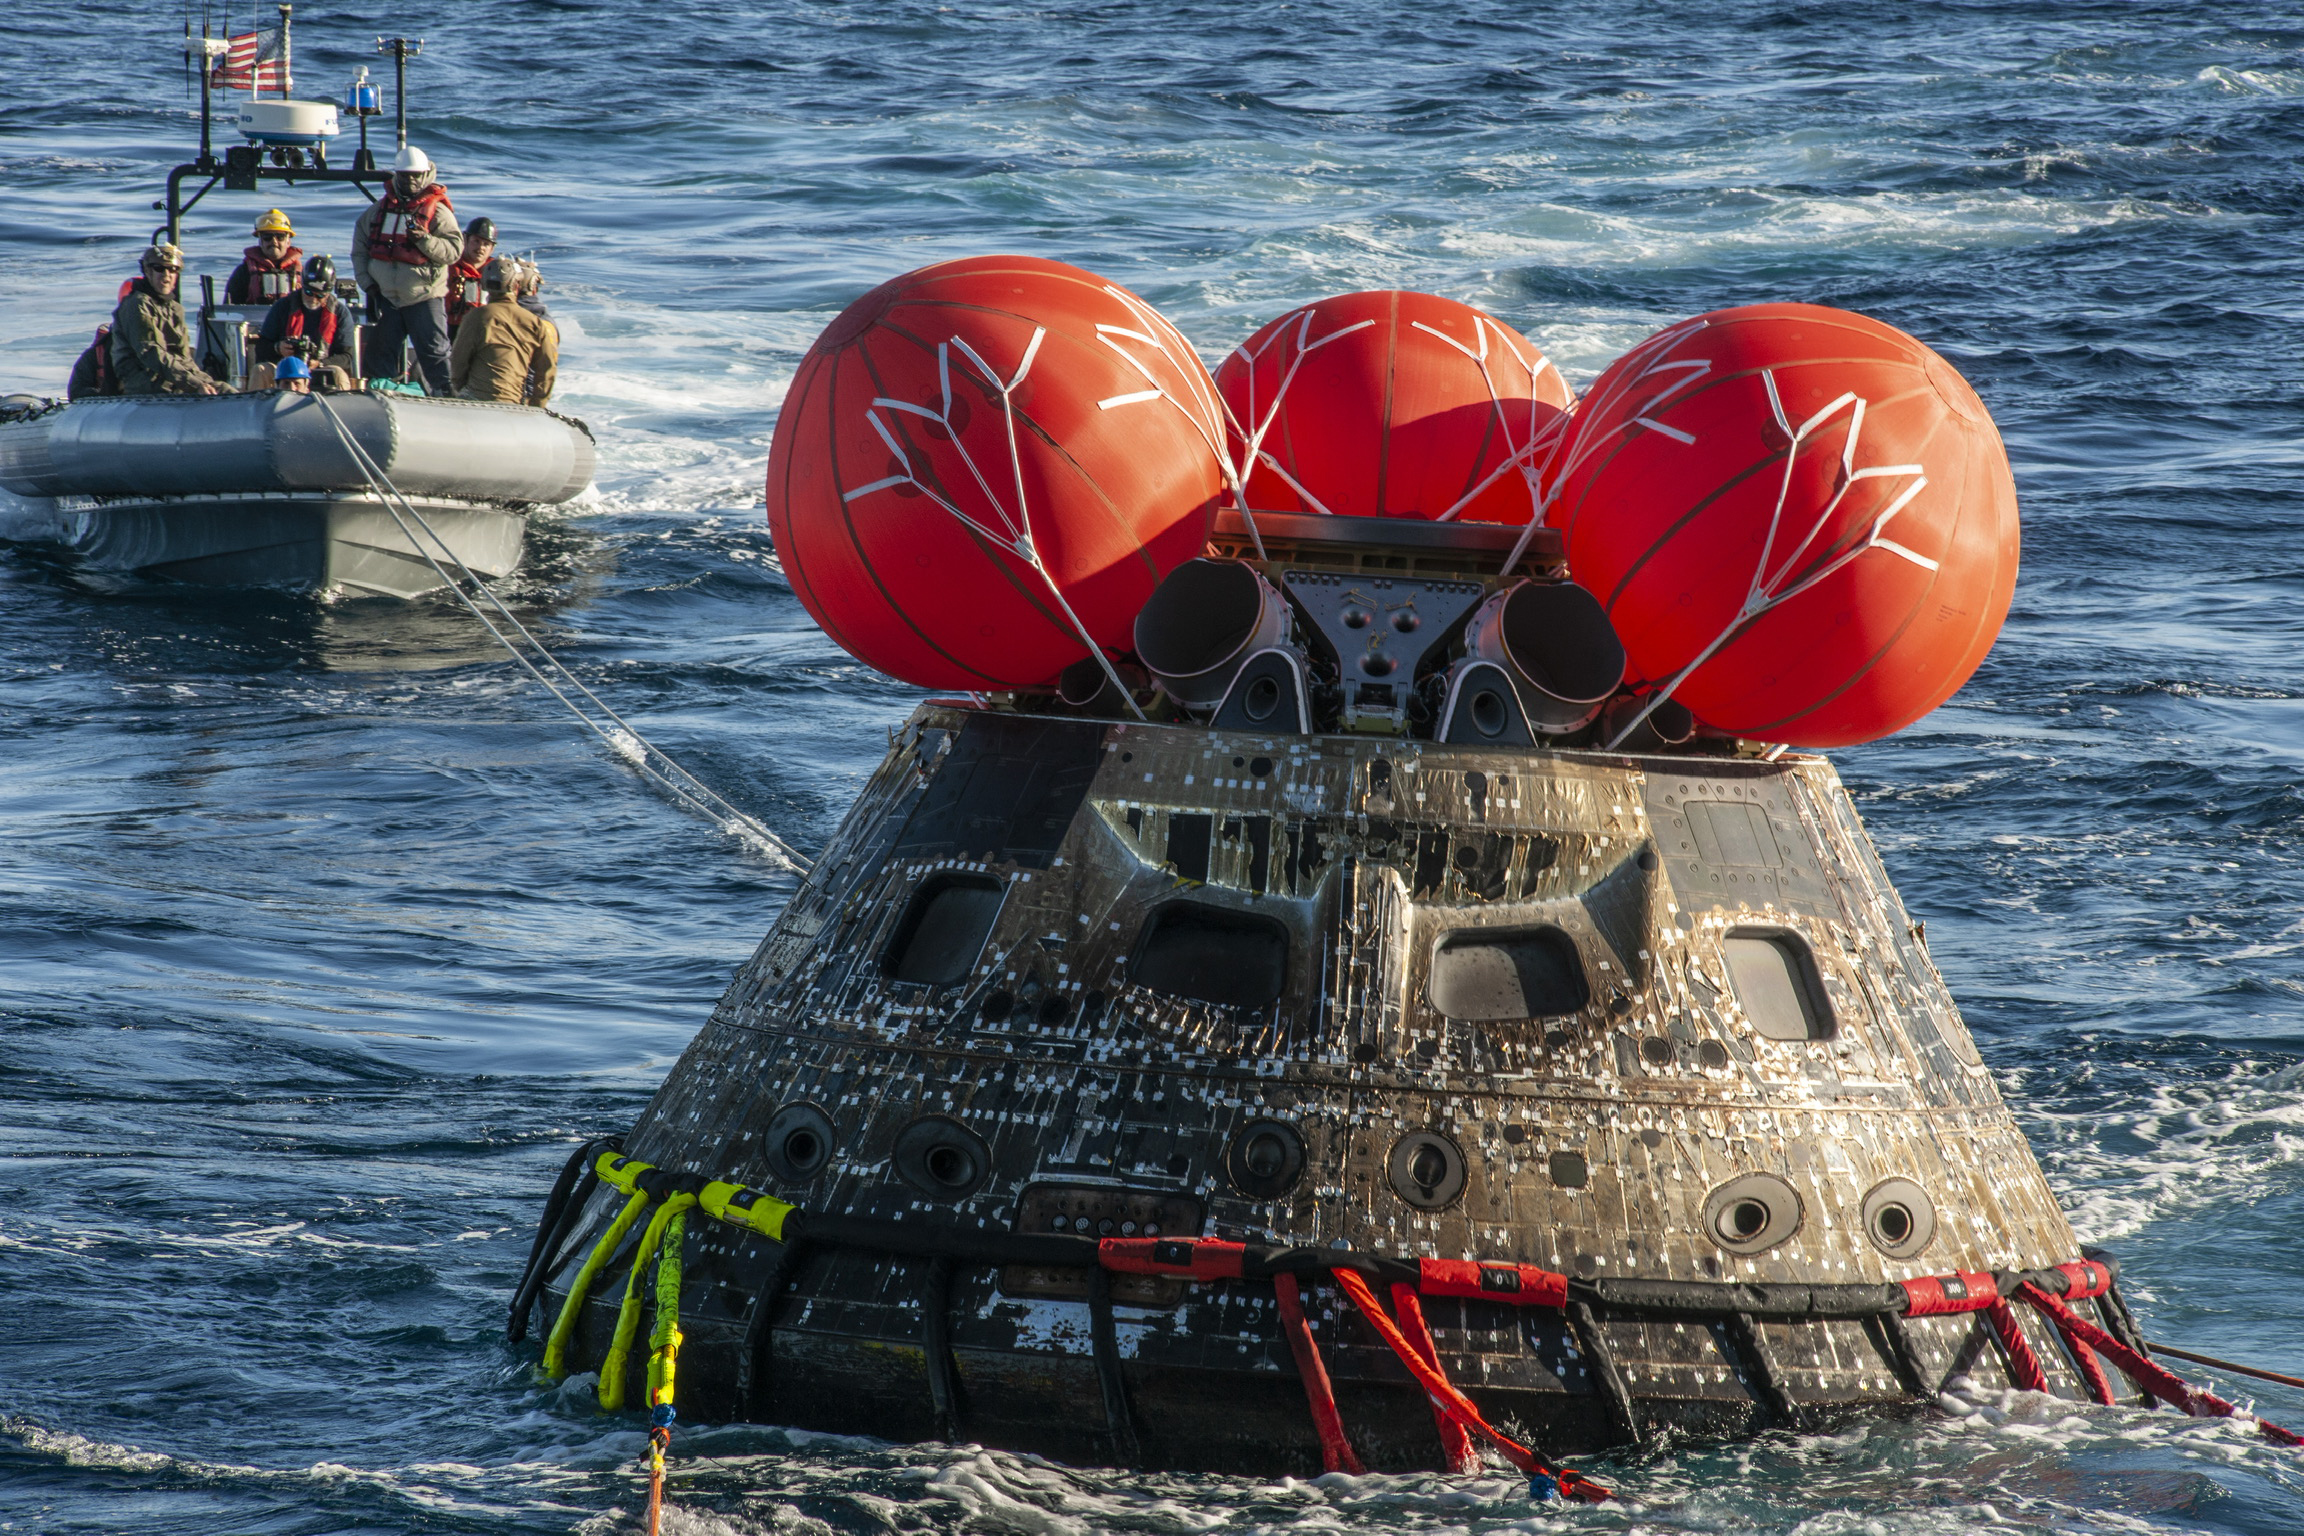 nasa moon capsule suffered extensive damage during 2022 test flight